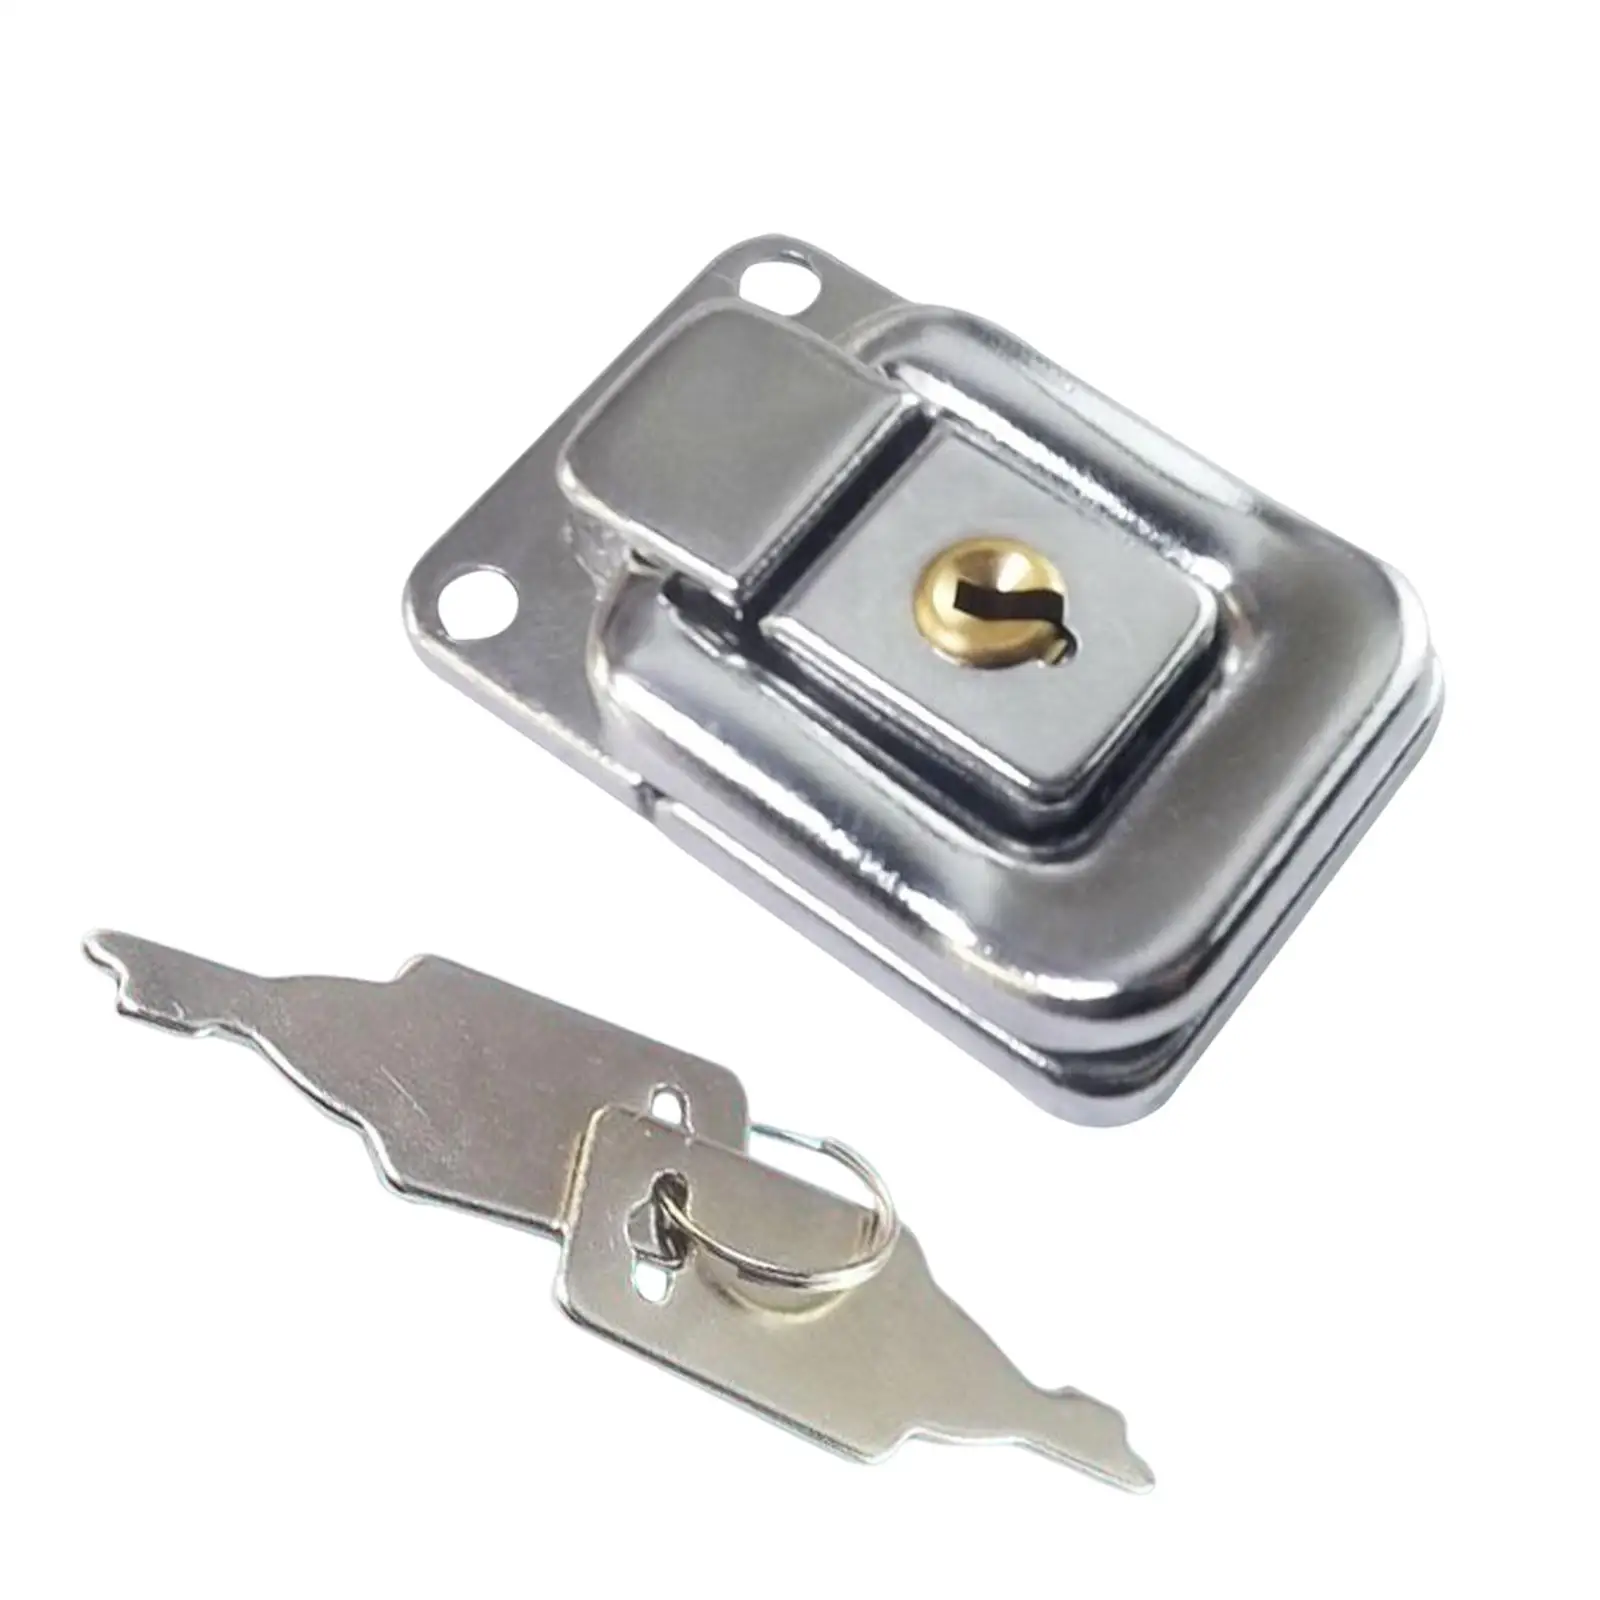 Metal Clasp Lock Toggle Latch with Keys for Drawbolt Closure Box Chest